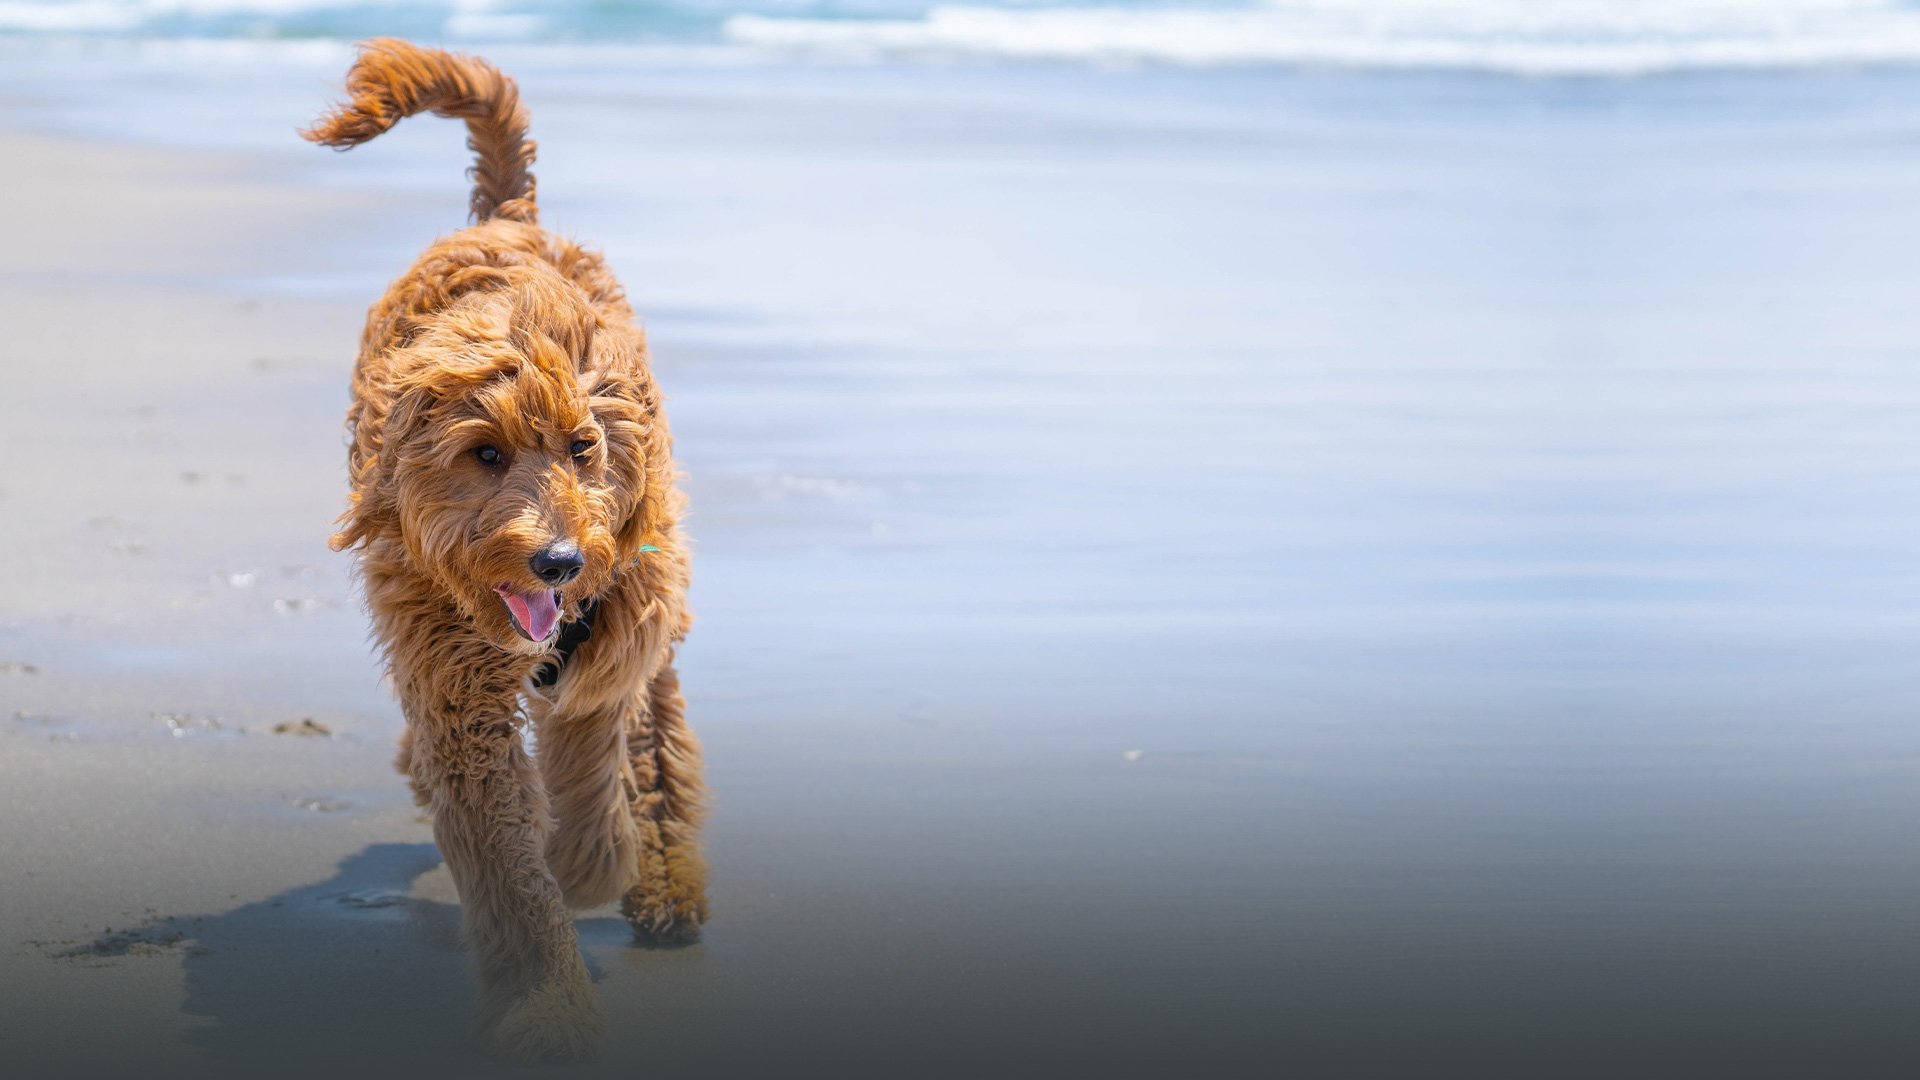 Goldendoodle Daily Schedule Plan By Age